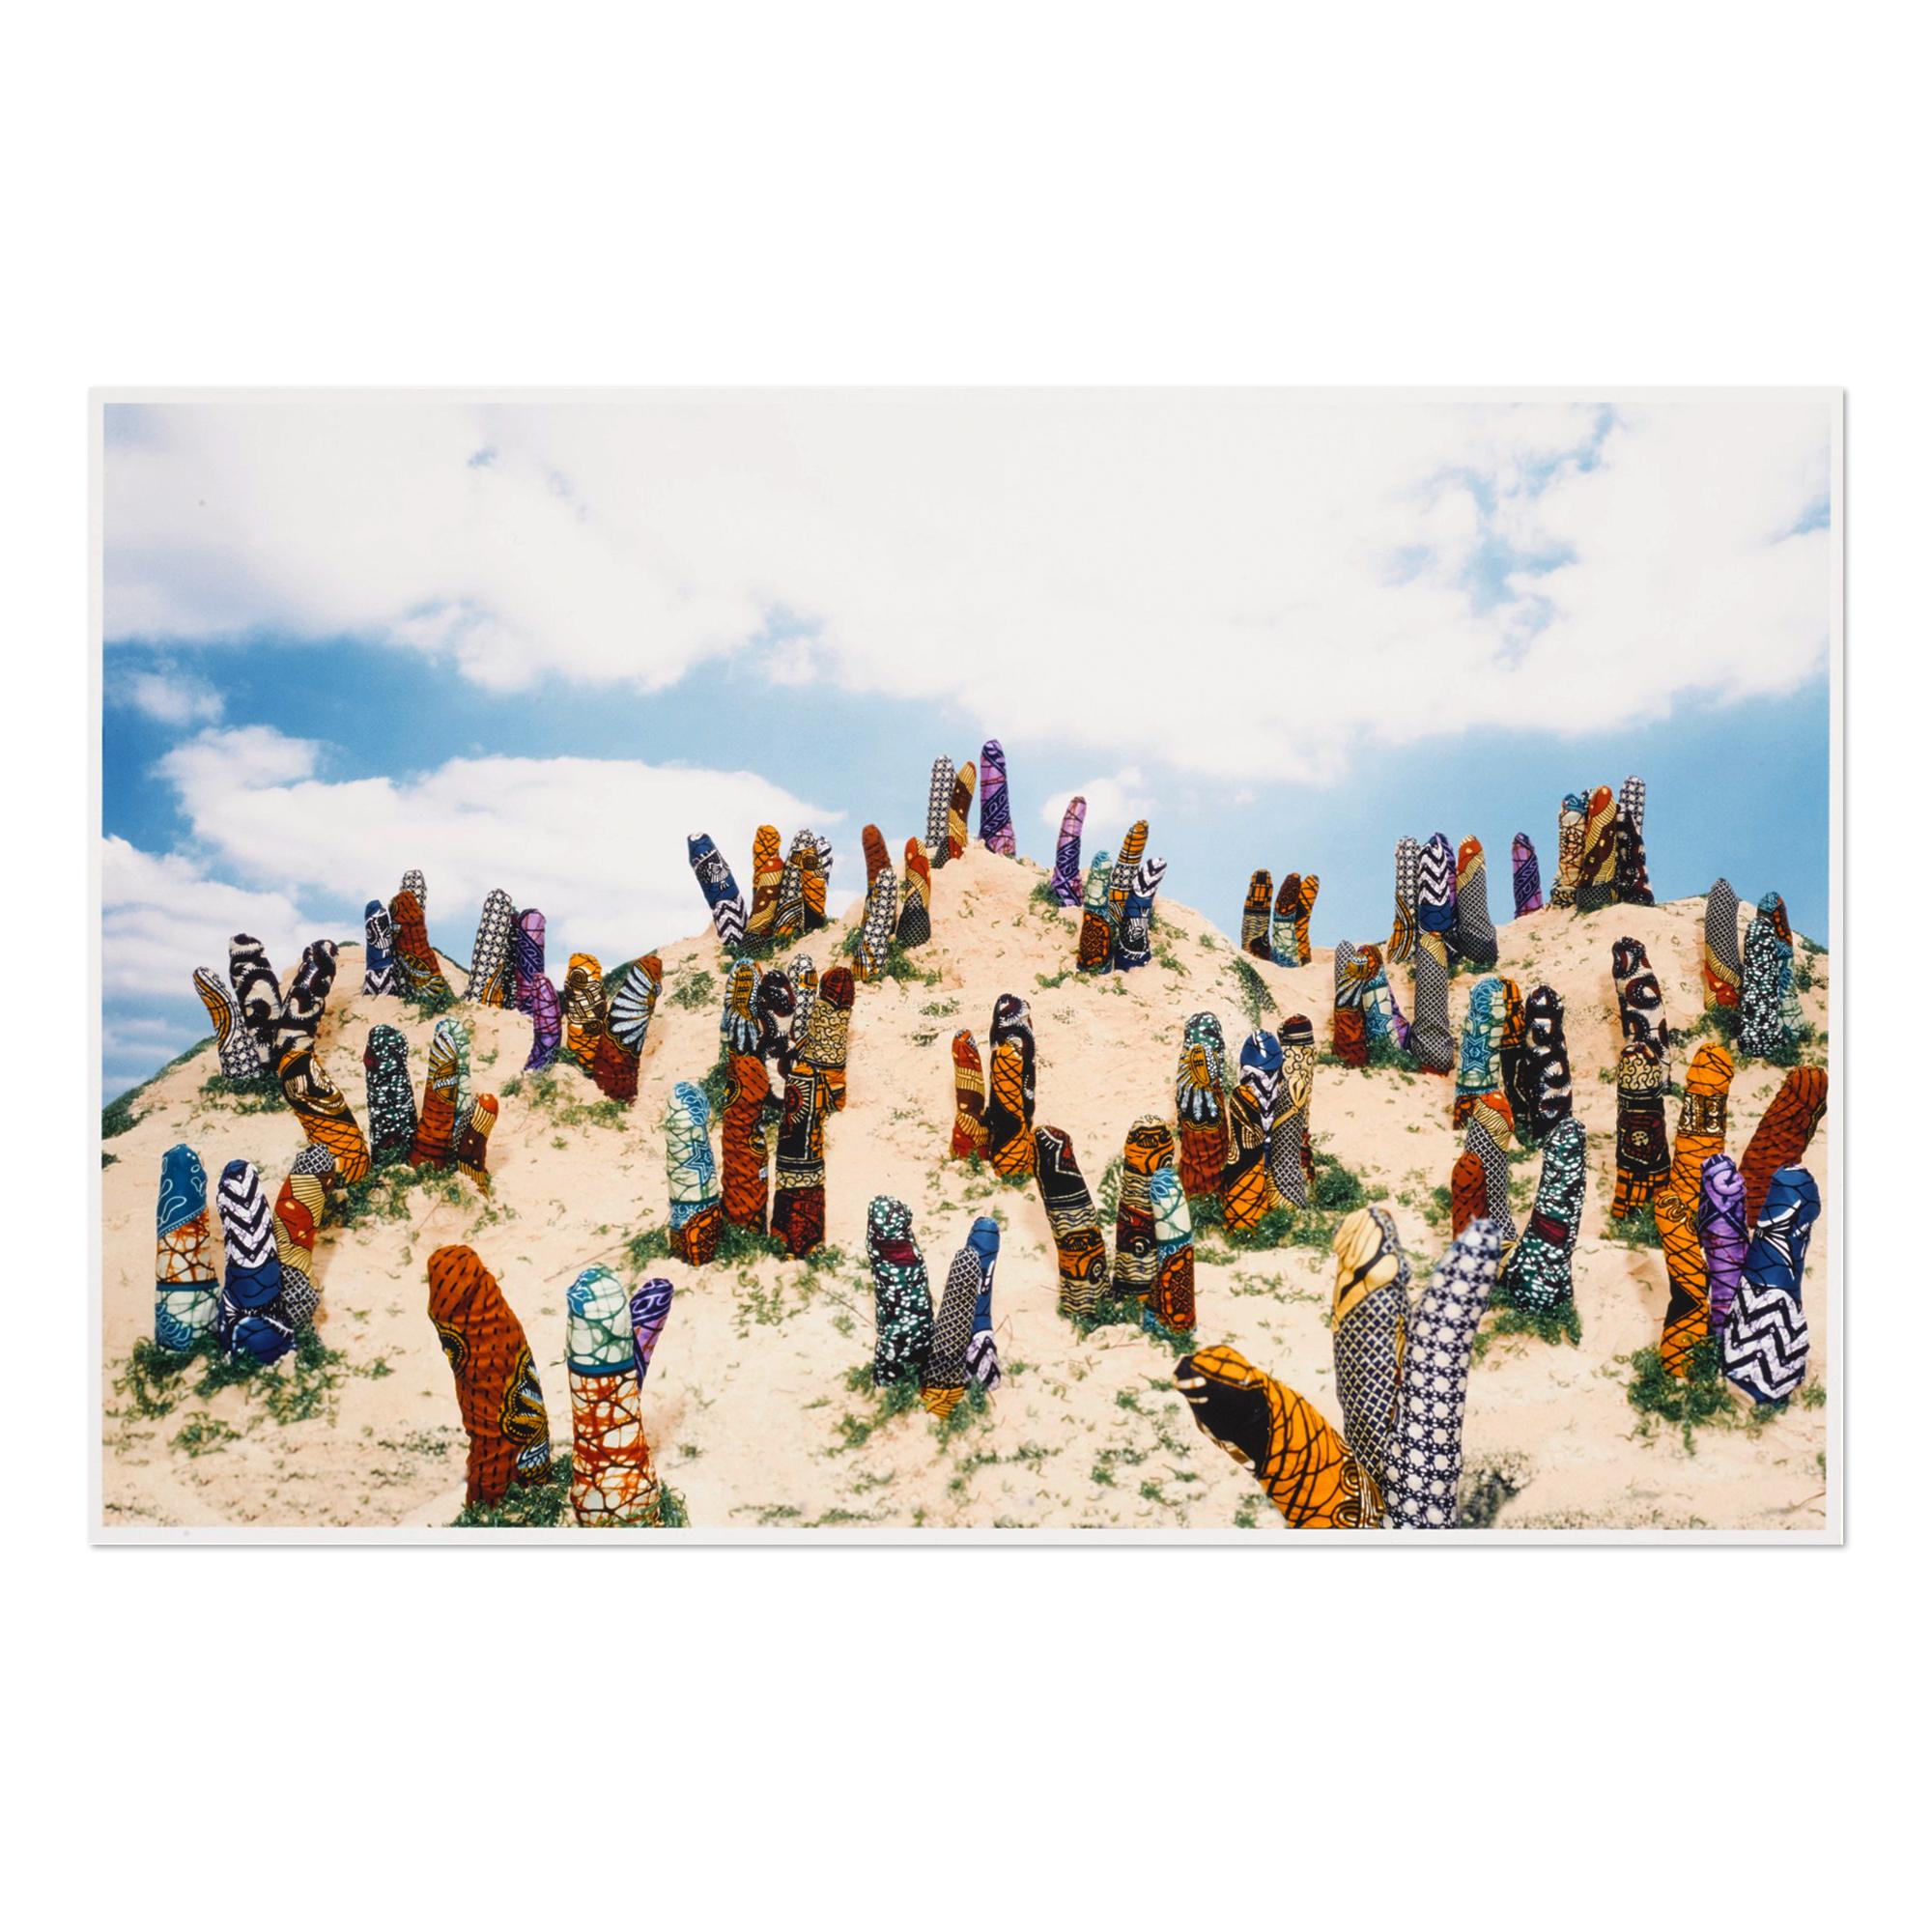 Yinka Shonibare CBE, (b. 1962)
Dreamscape (for Documenta 11), 2002
Medium: Chromogenic photograph
Dimensions: 40.5 x 60 cm (16 x 23.5 in)
Edition of 40: Hand-signed and numbered